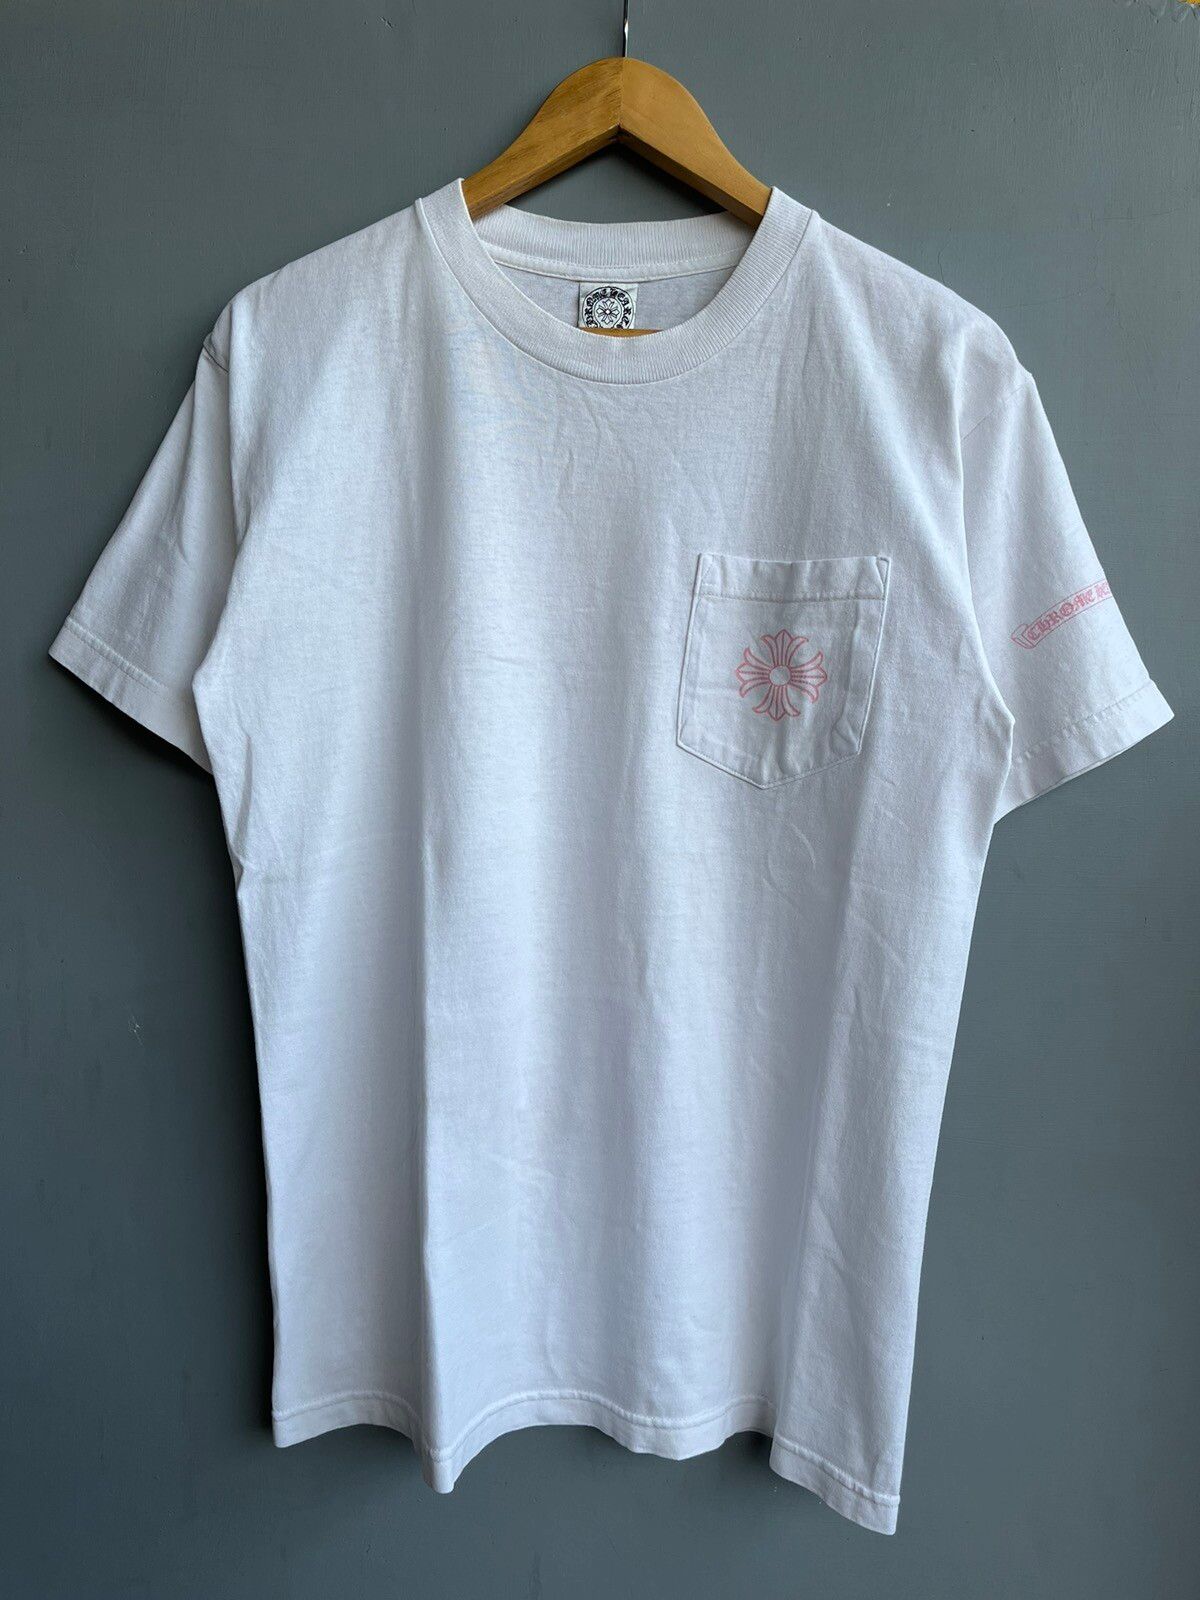 Pre-owned Chrome Hearts X Vintage Chrome Hearts Pink Cross Pocket Tee In White